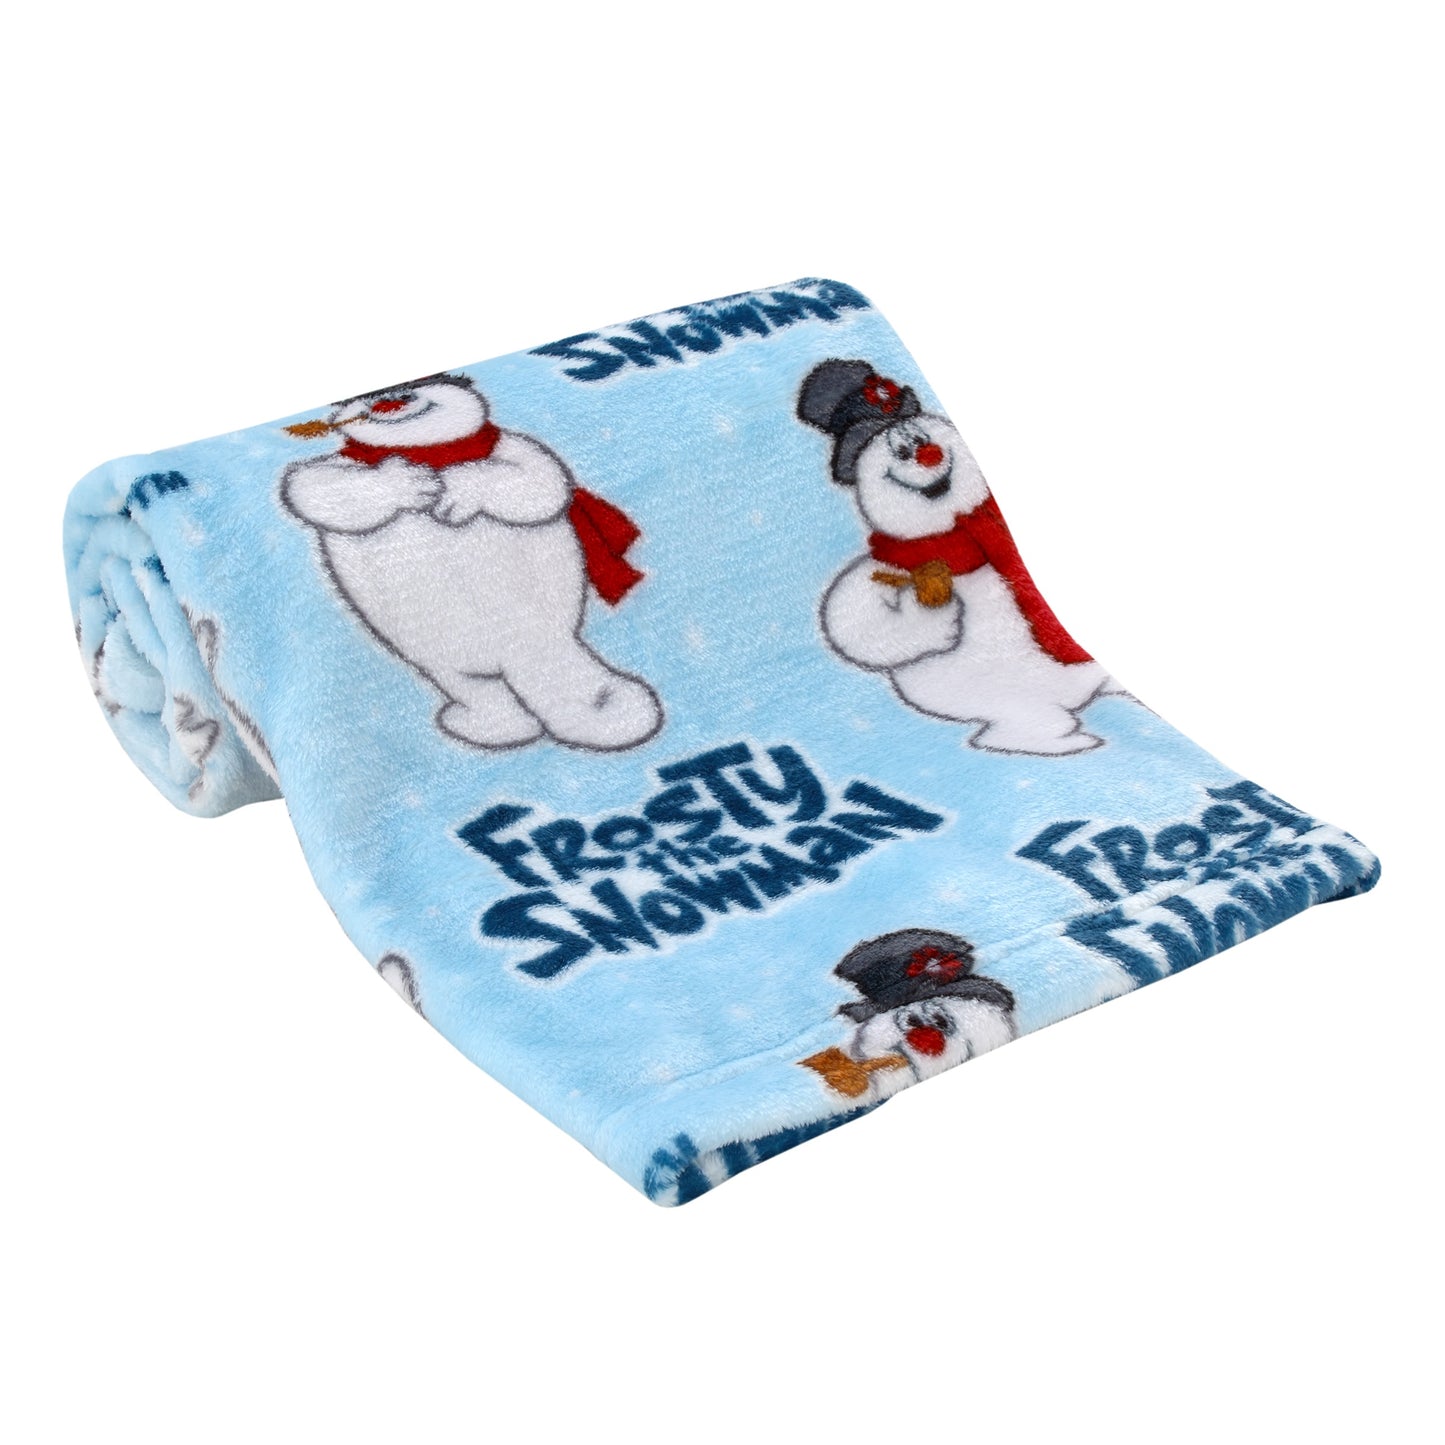 Warner Brothers Frosty The Snowman Light Blue, Red, and White Super Soft Holiday Baby Blanket